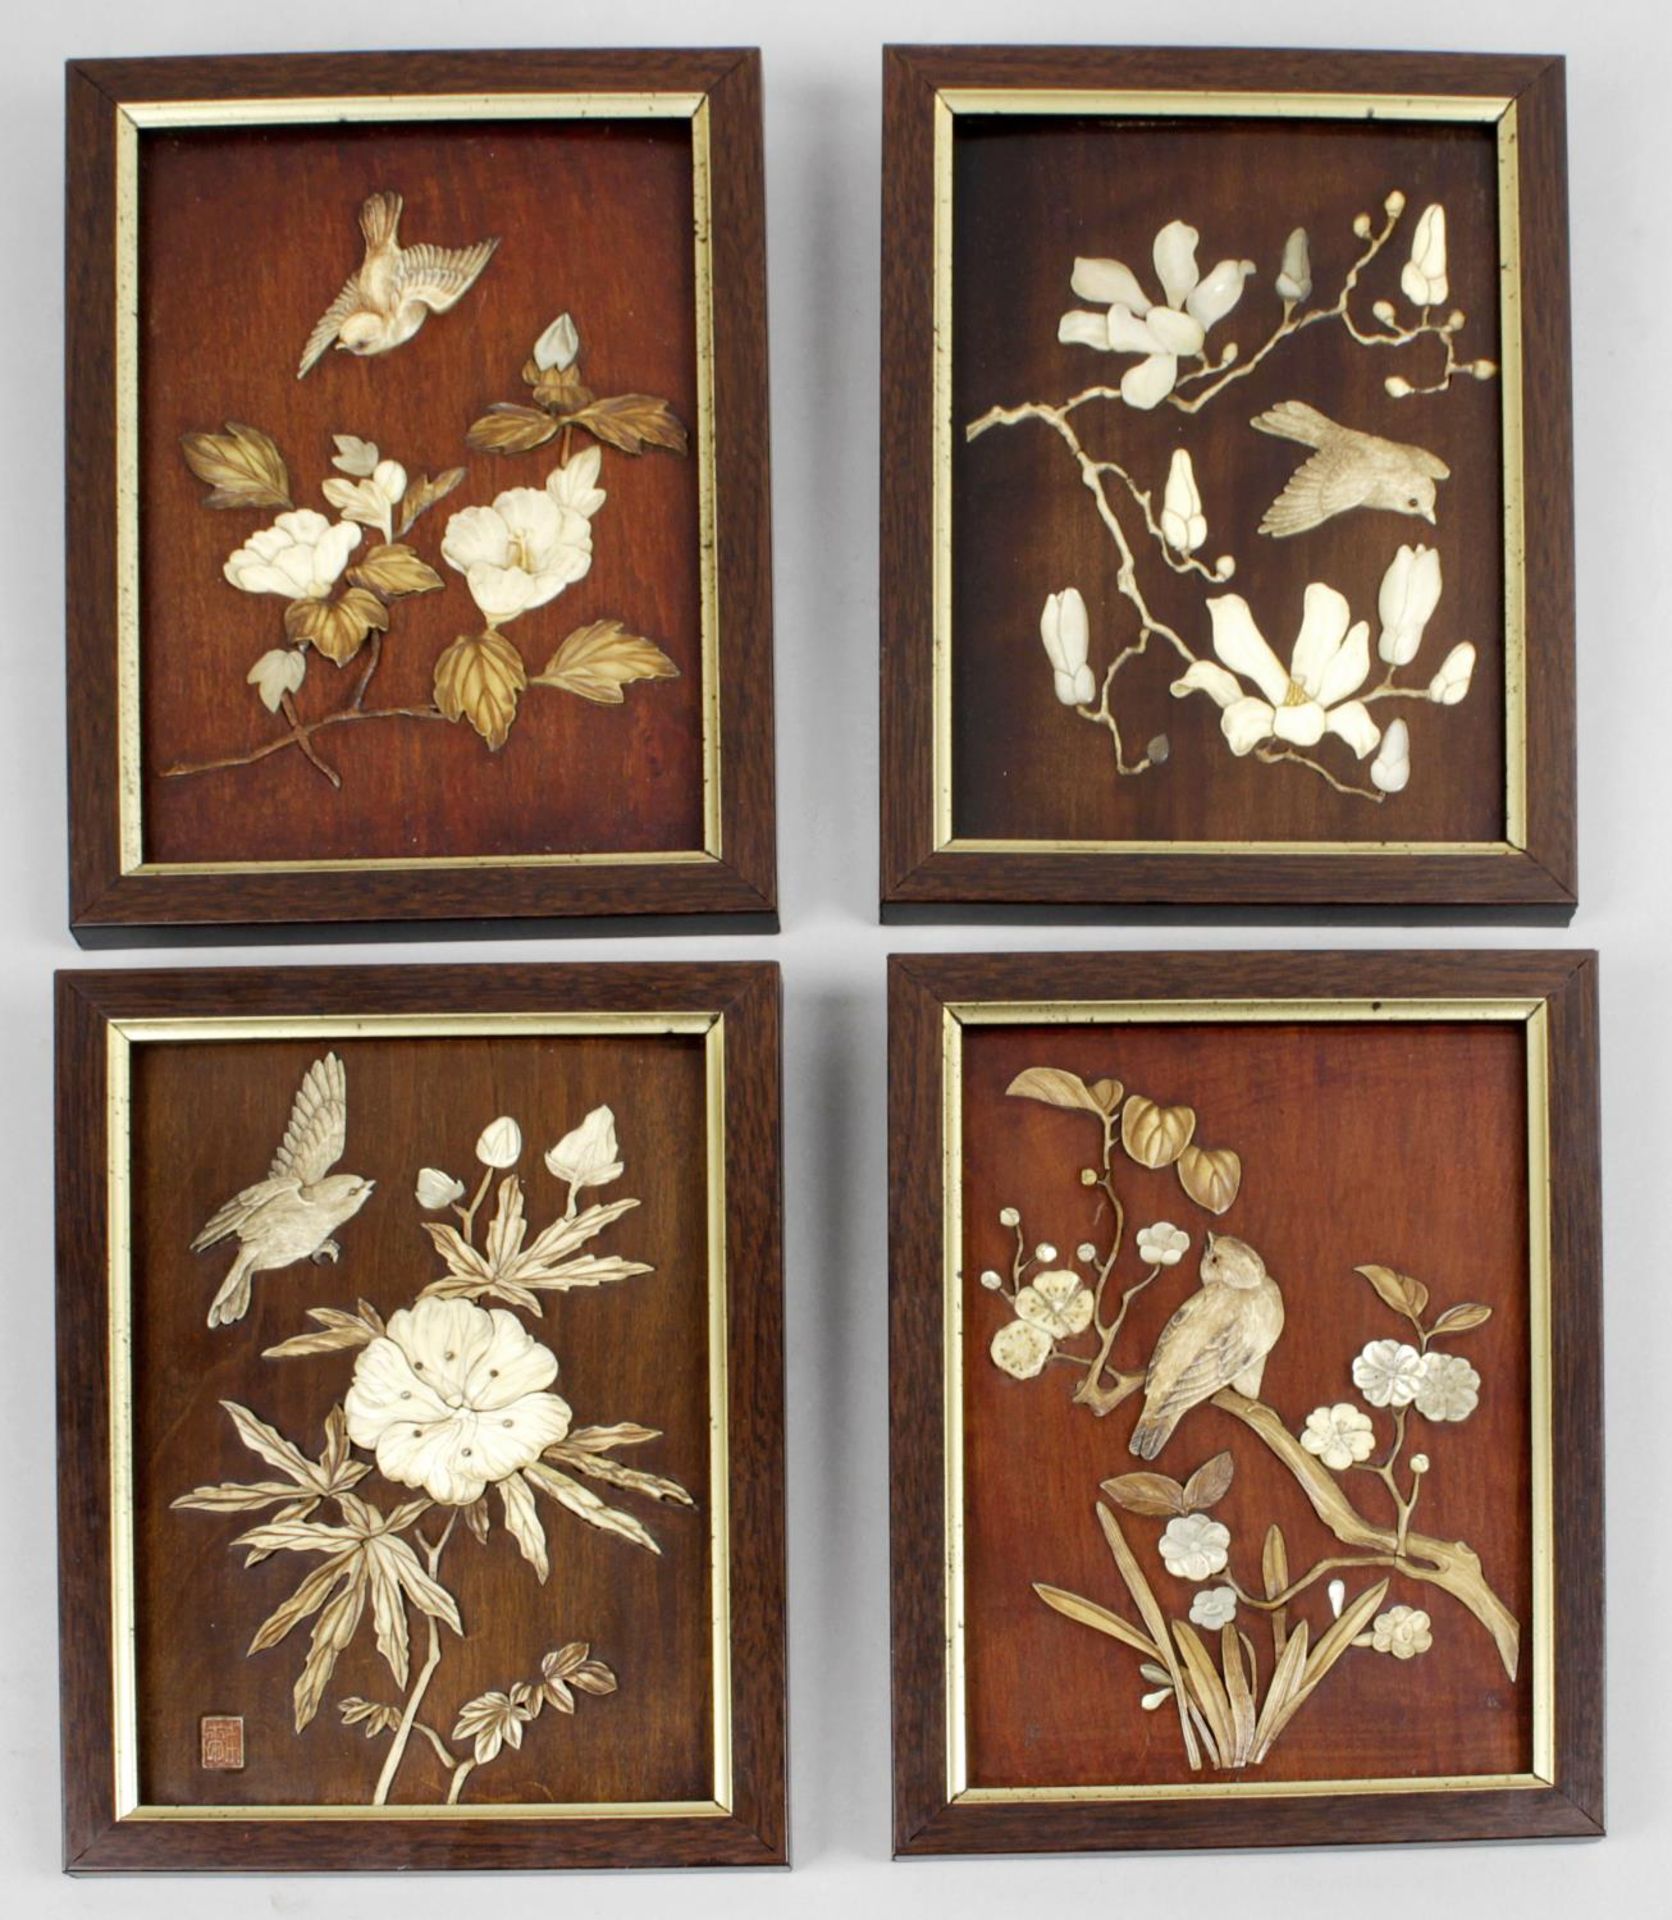 Four small late 19th century Japanese wooden panels,